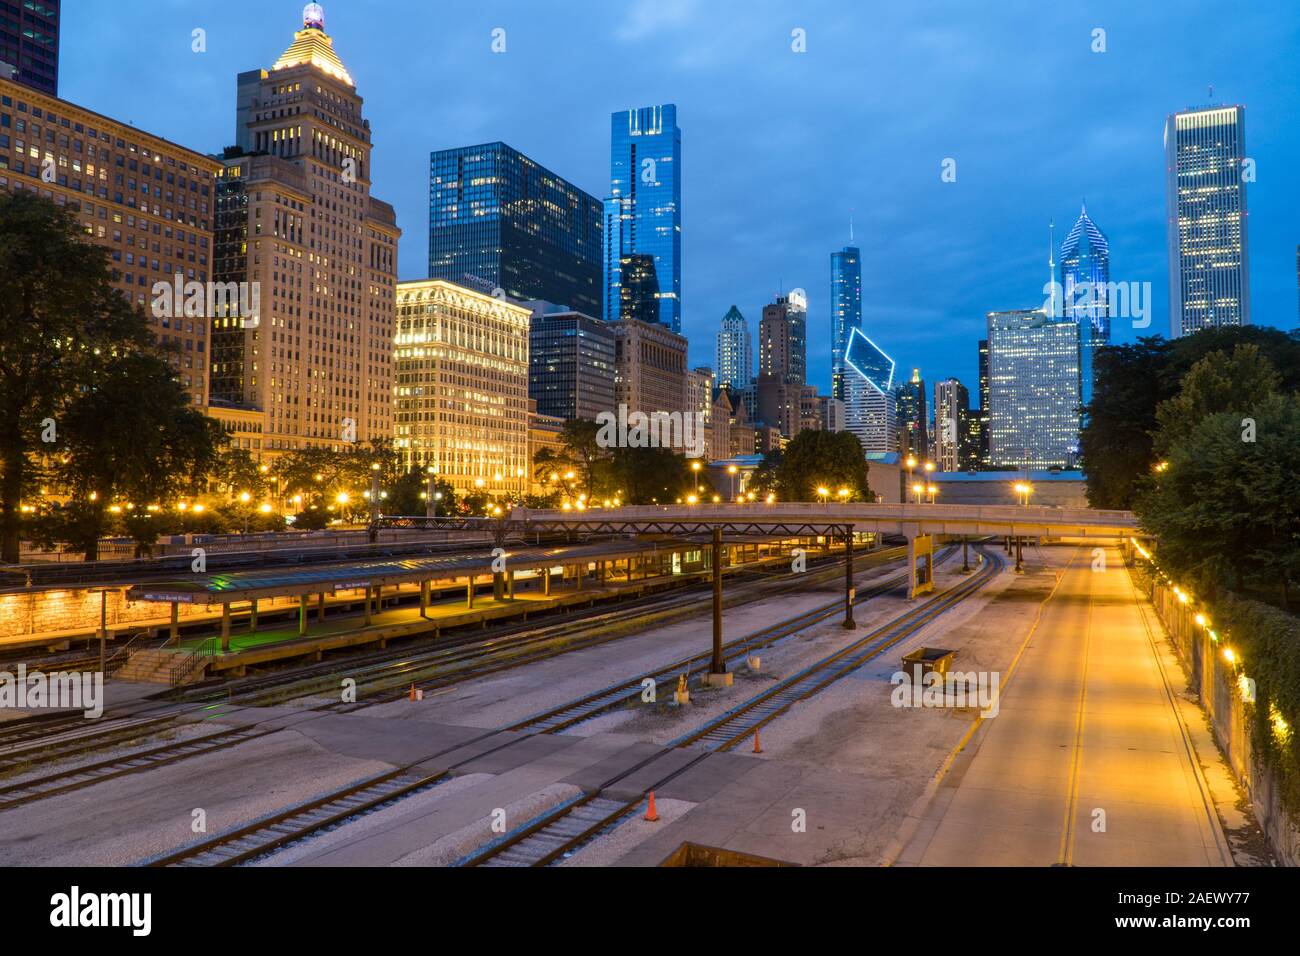 Evening twilight exterior skyline shot of downtown Chicago at night with building cityscape illuminating the dark sky view over train track rail yard Stock Photo